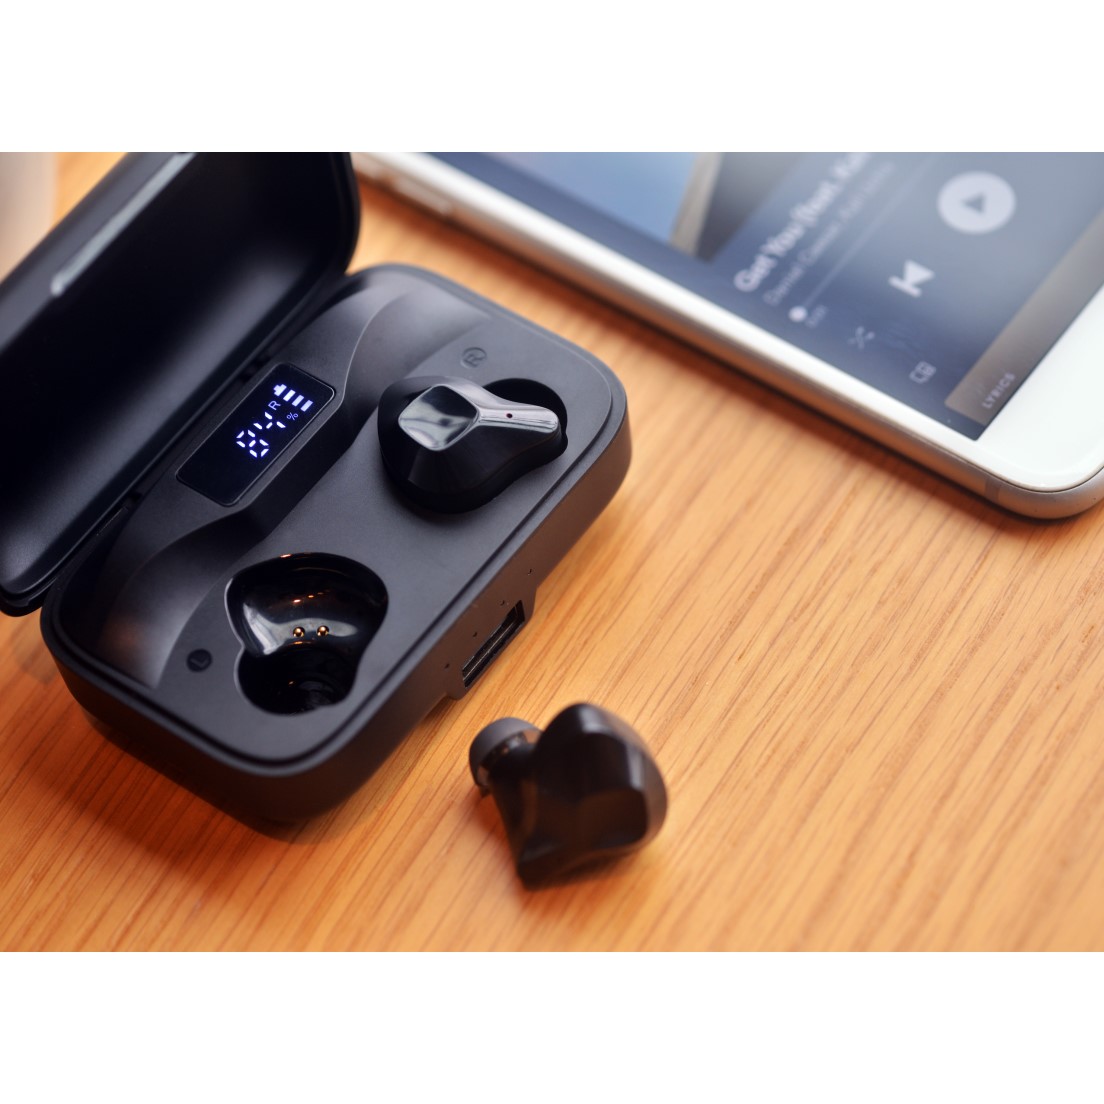 Energizer UB2609 Wireless Bluetooth Earbuds with Charging Case